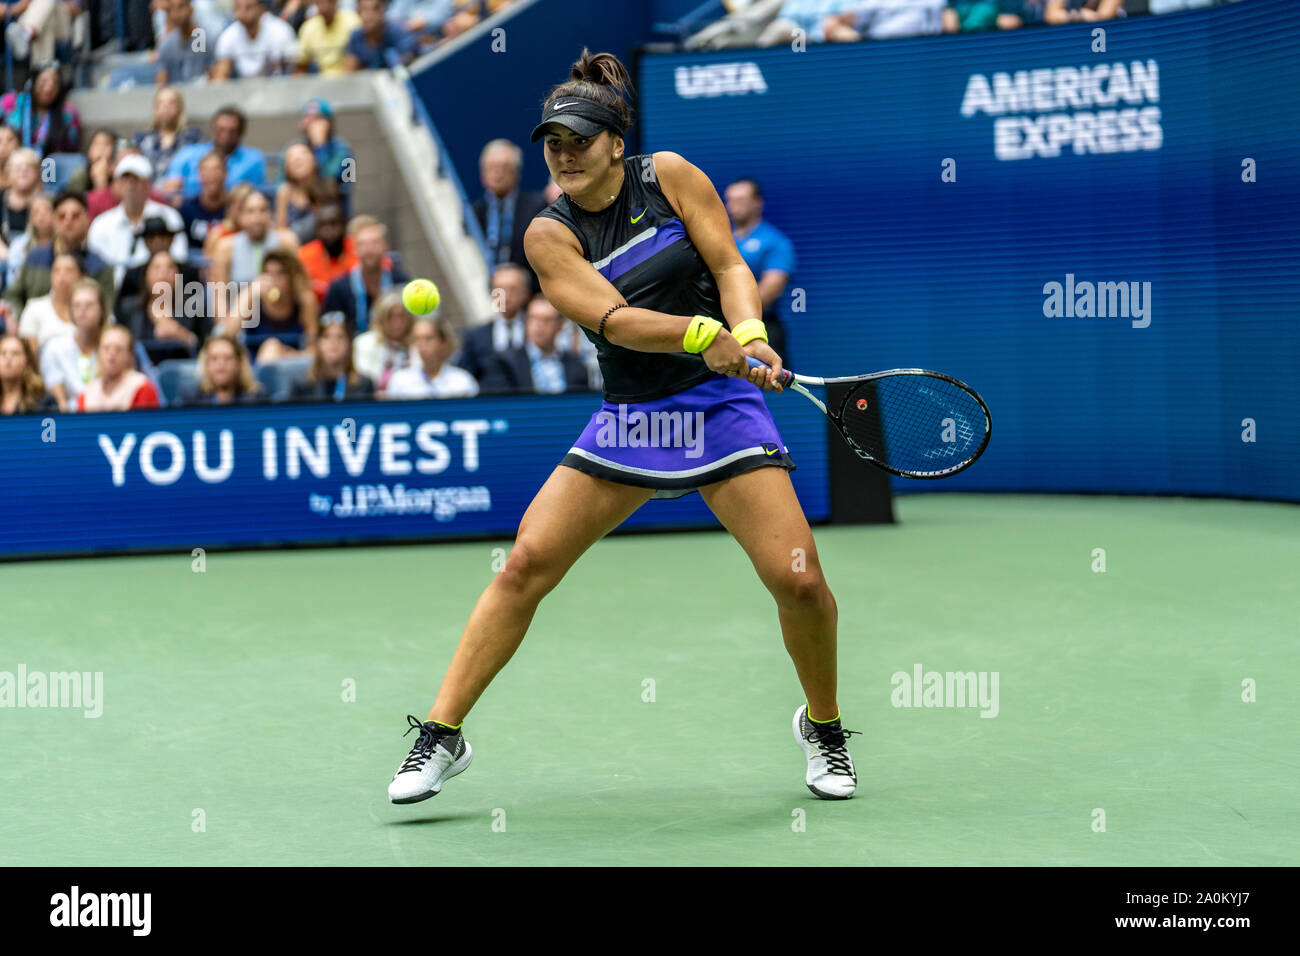 Bianca Andreescu of Canada competing in the finals of the Women's Singles at the 2019 US Open Tennis Stock Photo